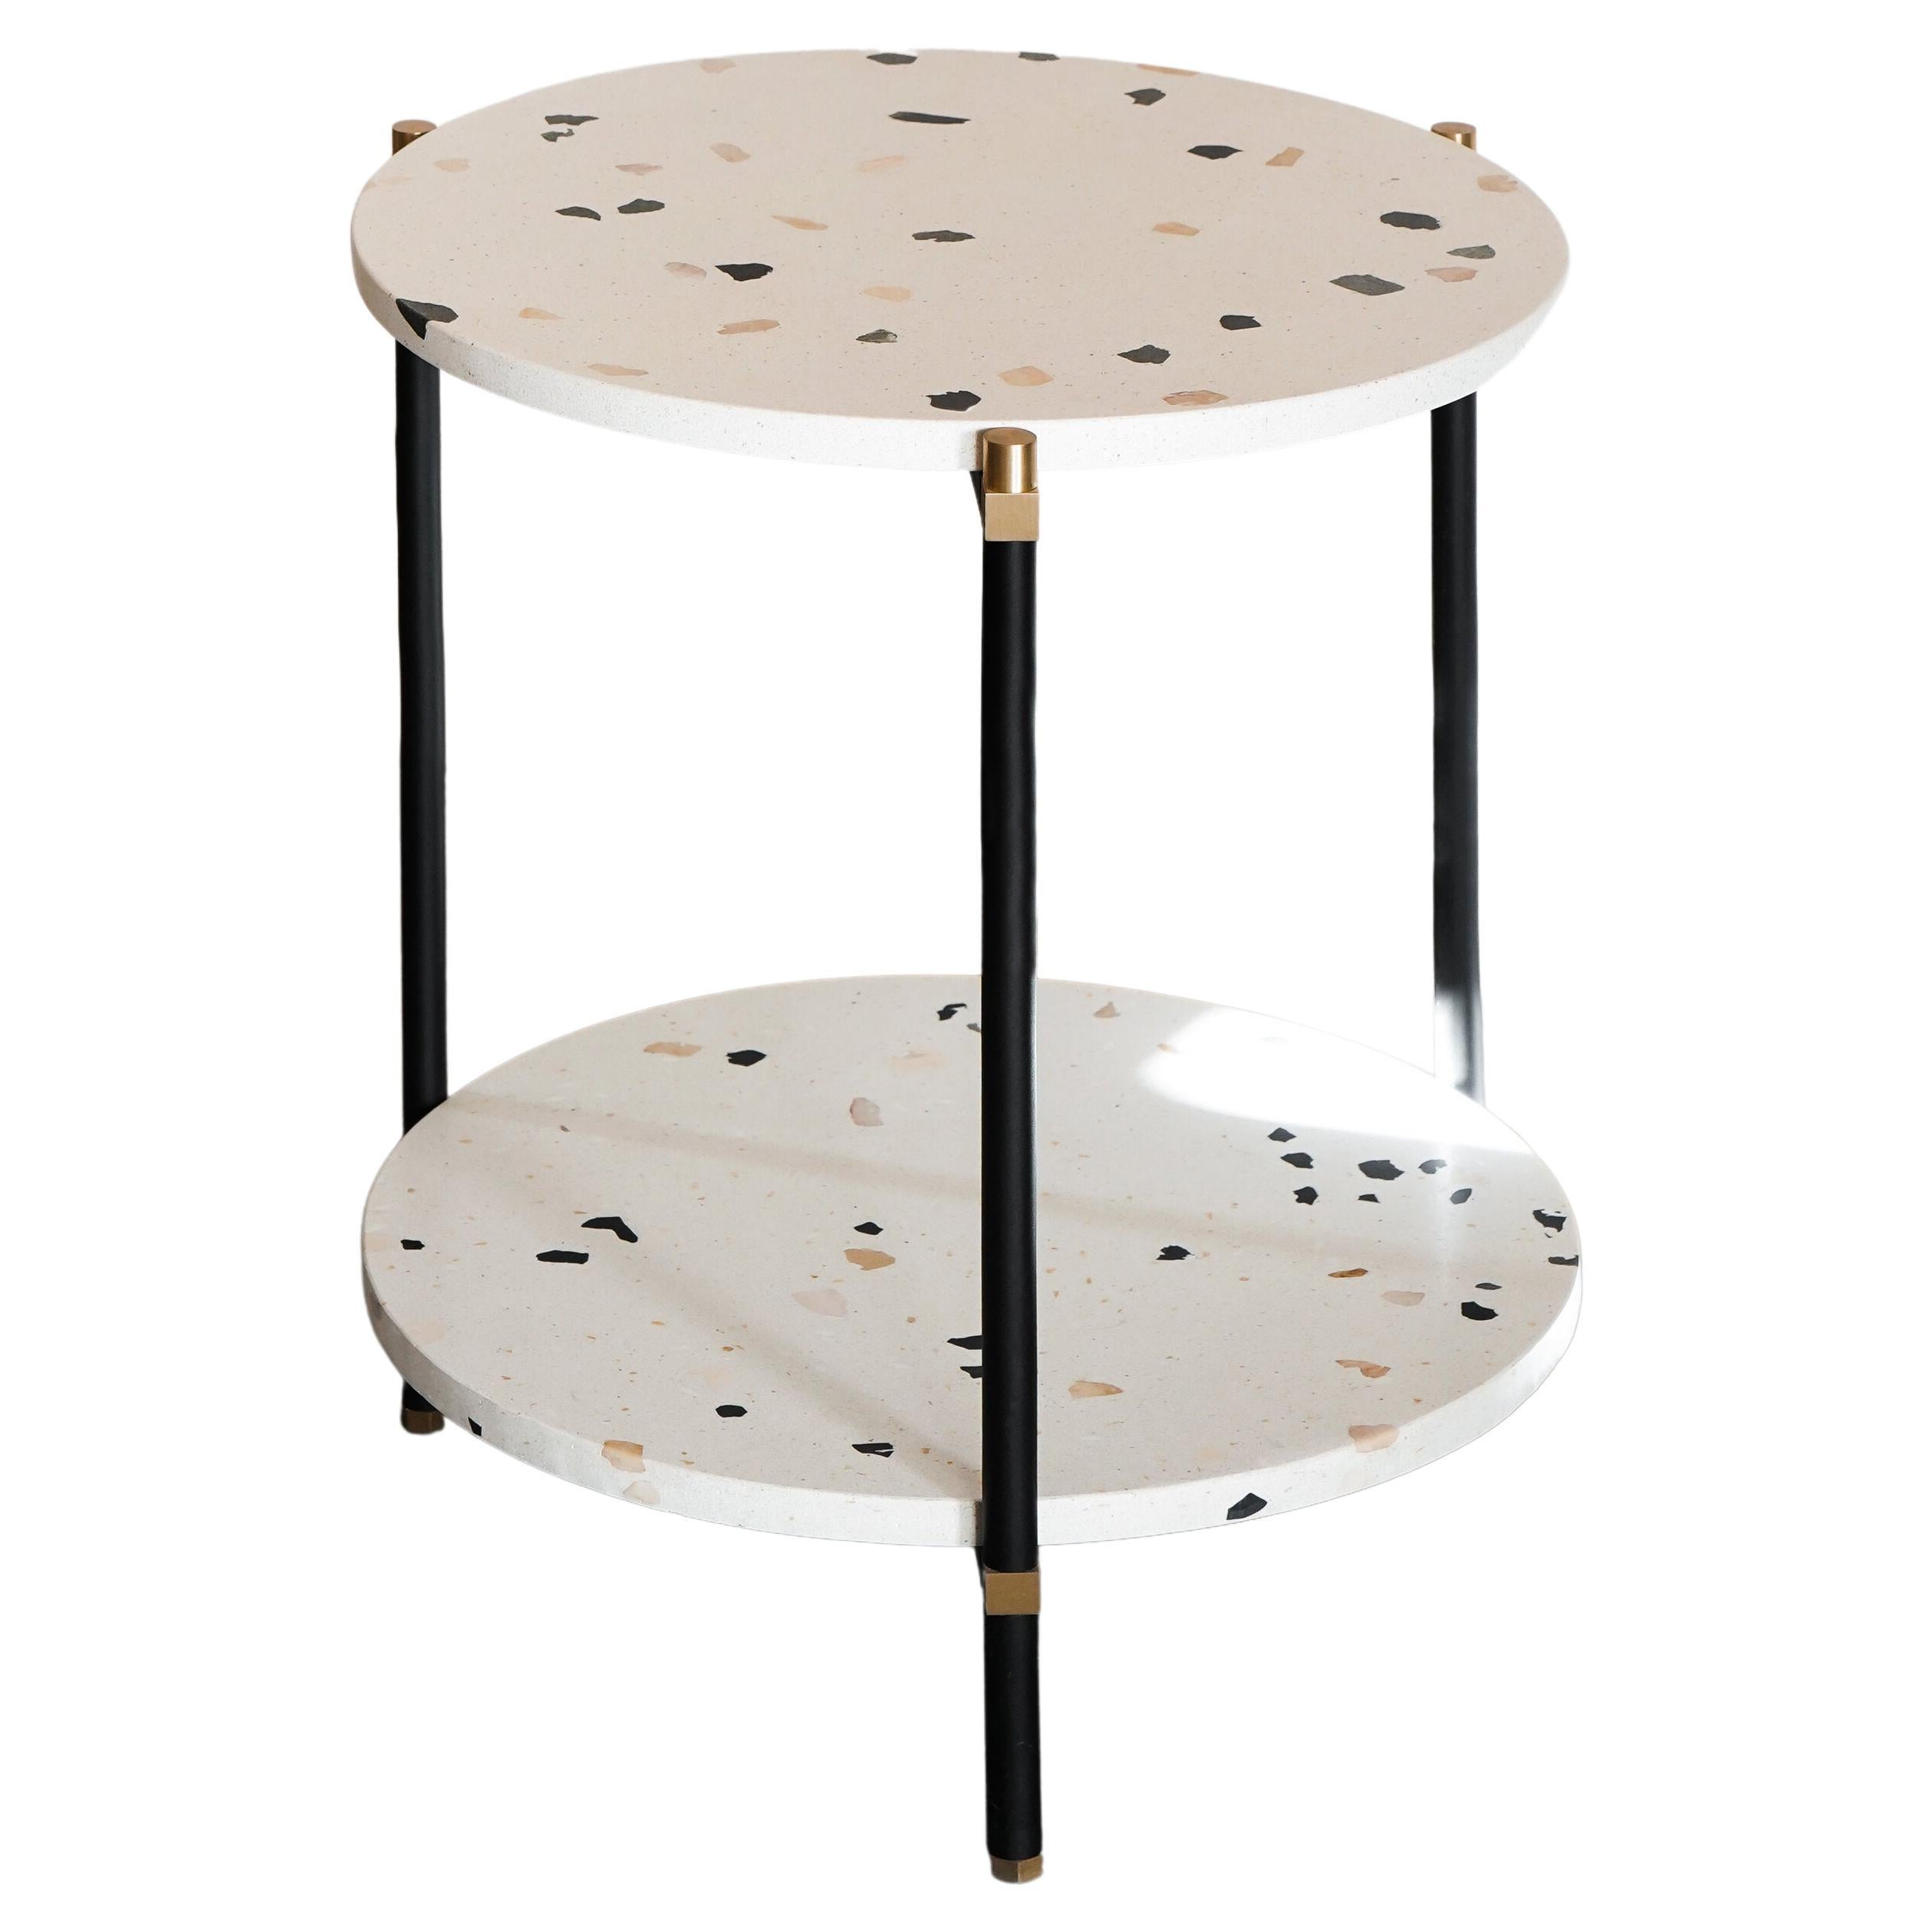 Double Bar Table 50 3 Legs by Contain